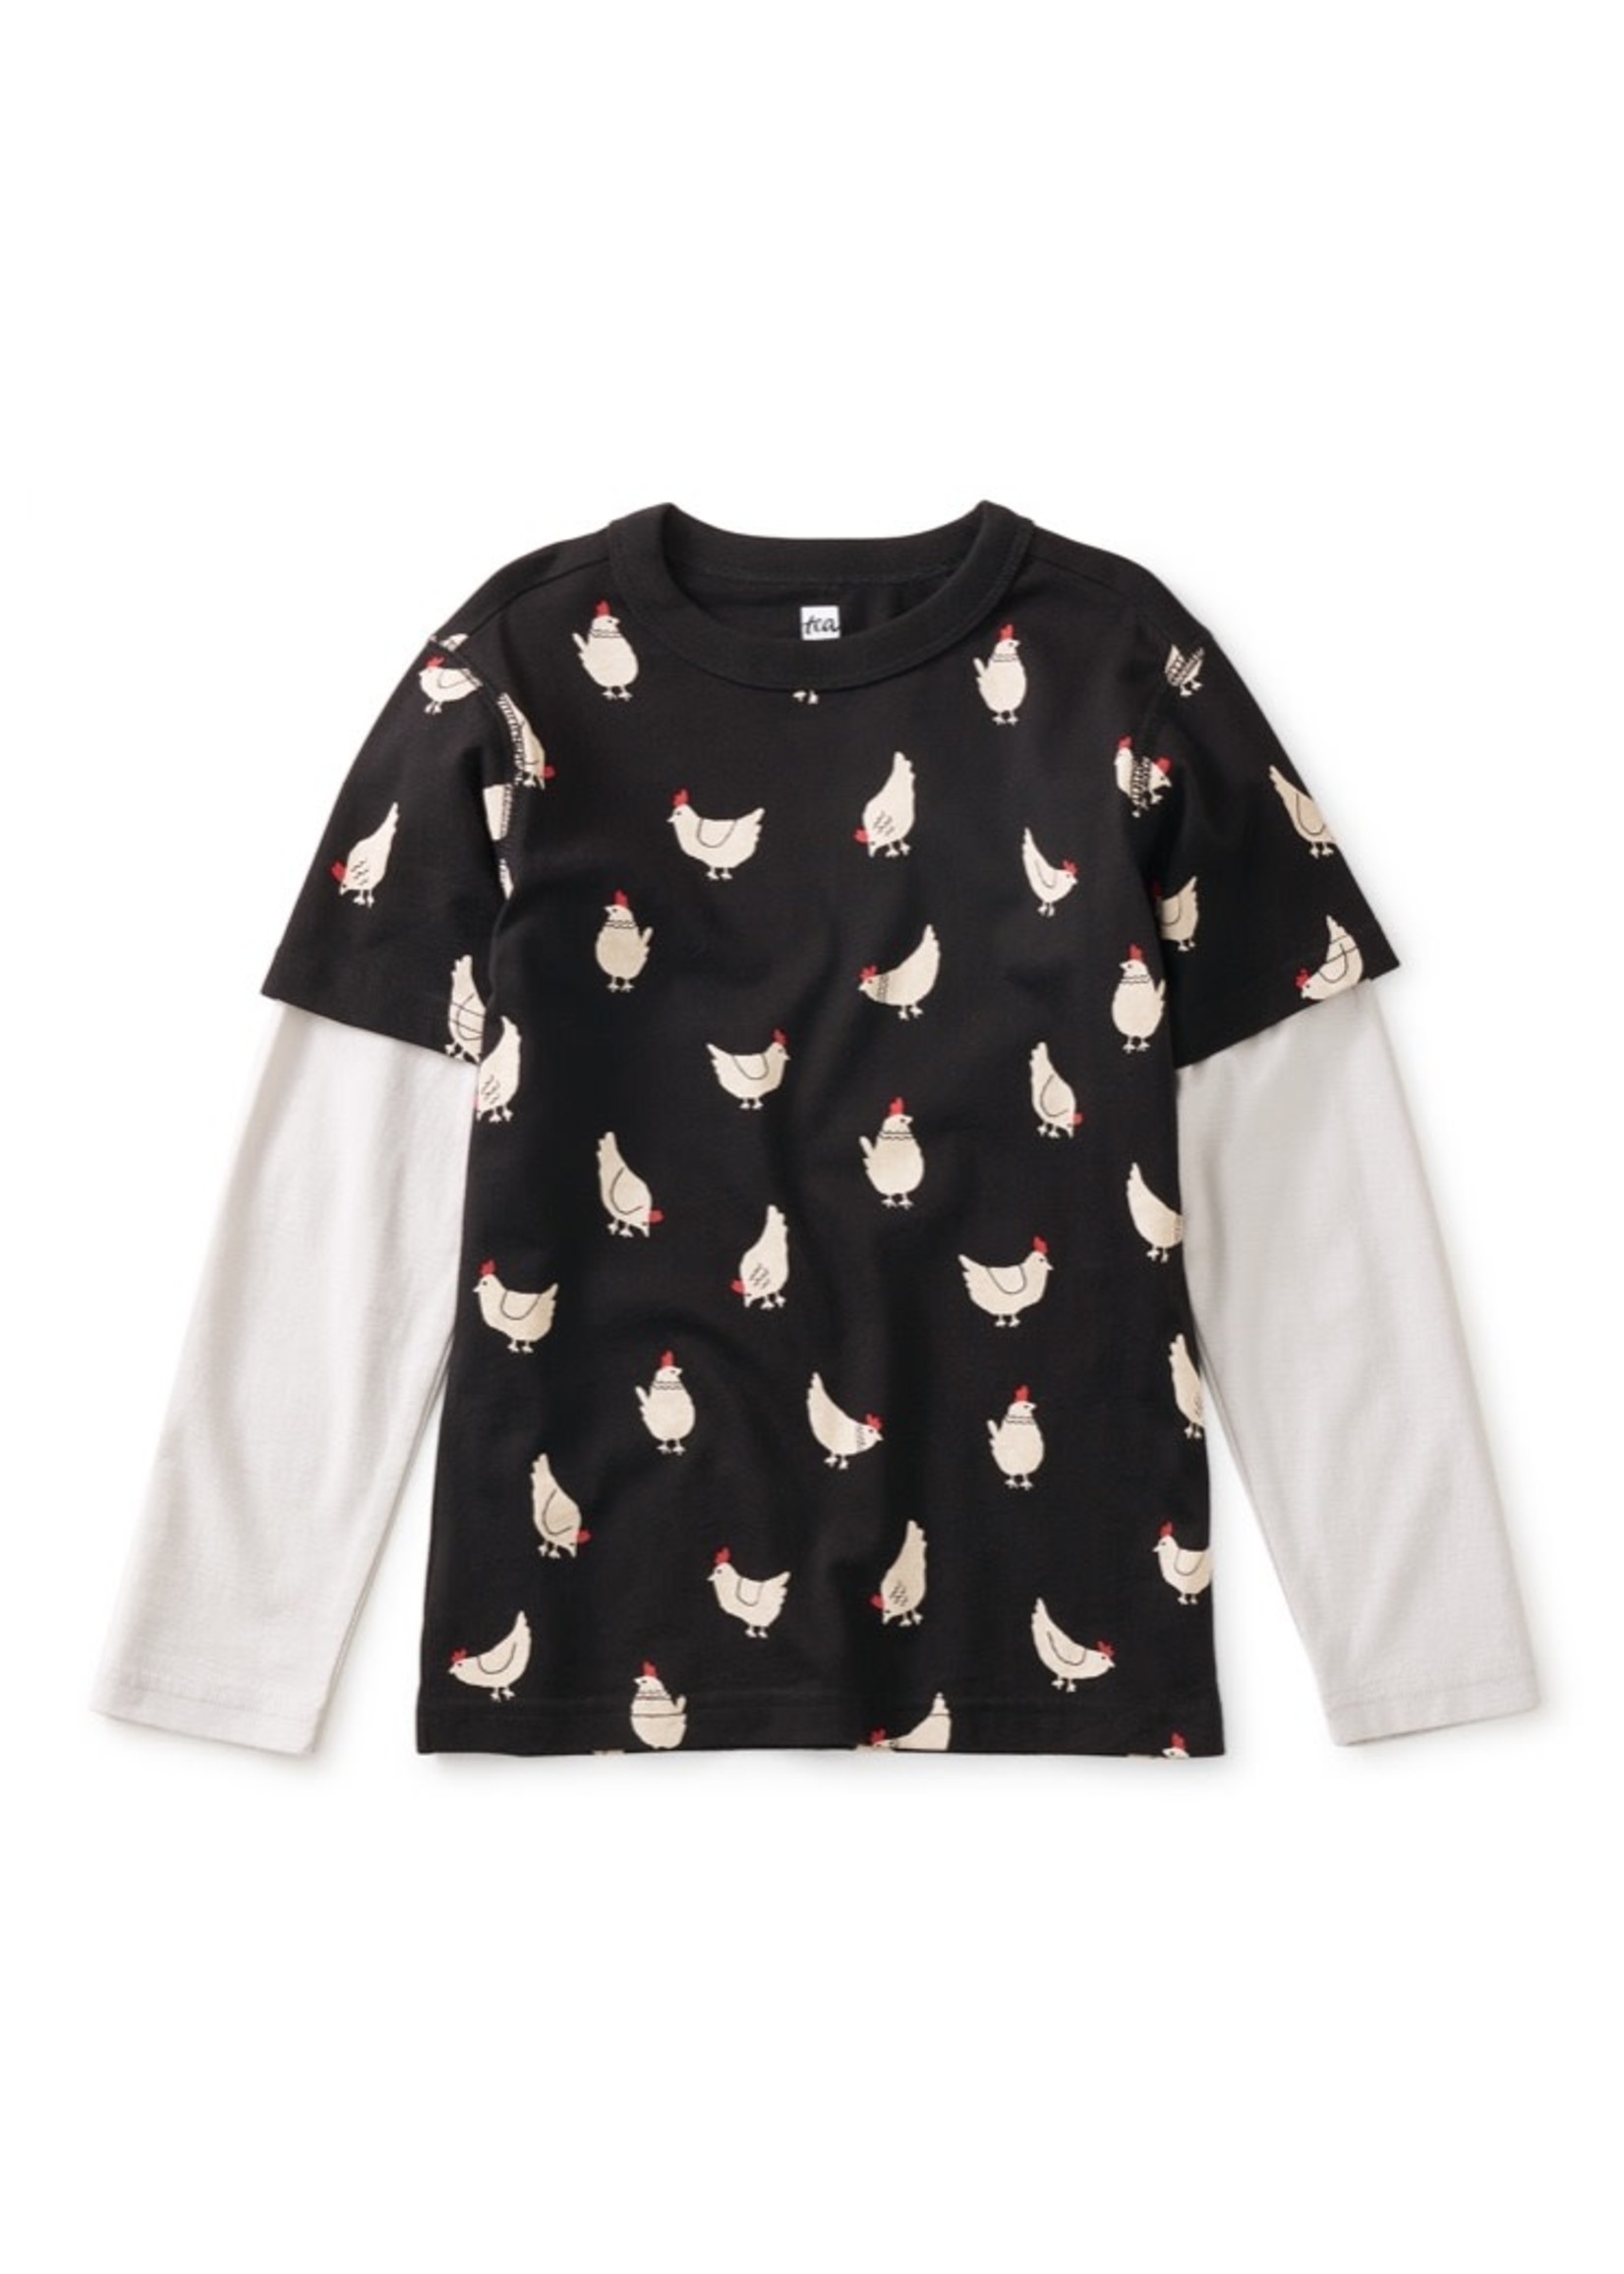 Tea Collection Tea Collection, Peruvian Chickens Printed Layered Sleeve Tee